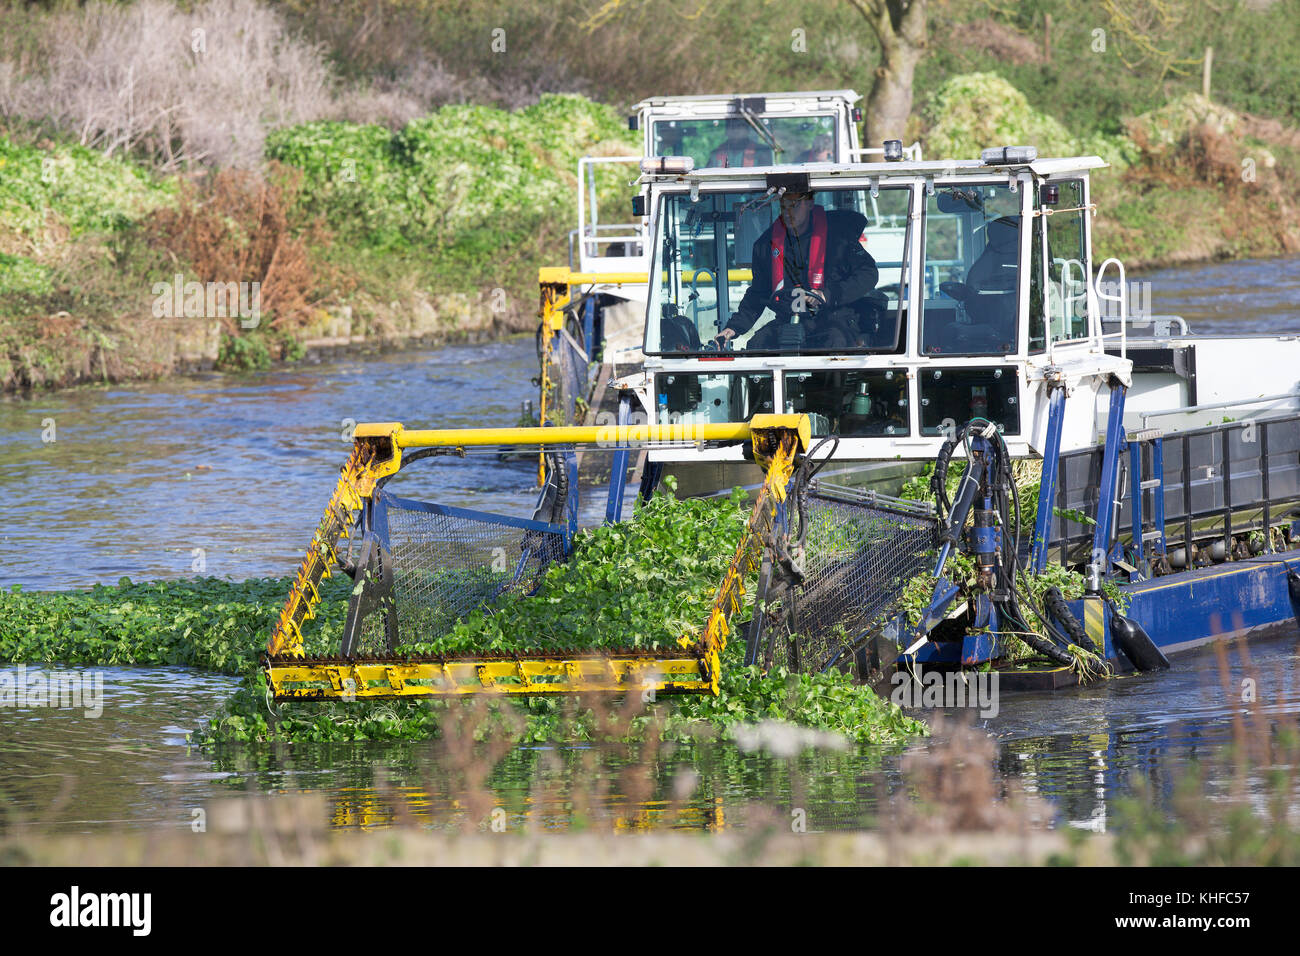 Environment Agency clearing the Pennywort weed on the River Cam in Cambridge on this week (Nov 16). Part of the river is now closed as they remove the invasive plant, which is taking over the water and threatening the punting industry.  A section of the world-famous River Cam in the university city of Cambridge has been closed today to allow a specialist WEED-CUTTING BOAT to remove an invasive plant, which is taking over the water and threatening the punting industry.  The special machine has been employed by the Environment Agency to eradicate floating Pennywort, which can starve fish and pla Stock Photo